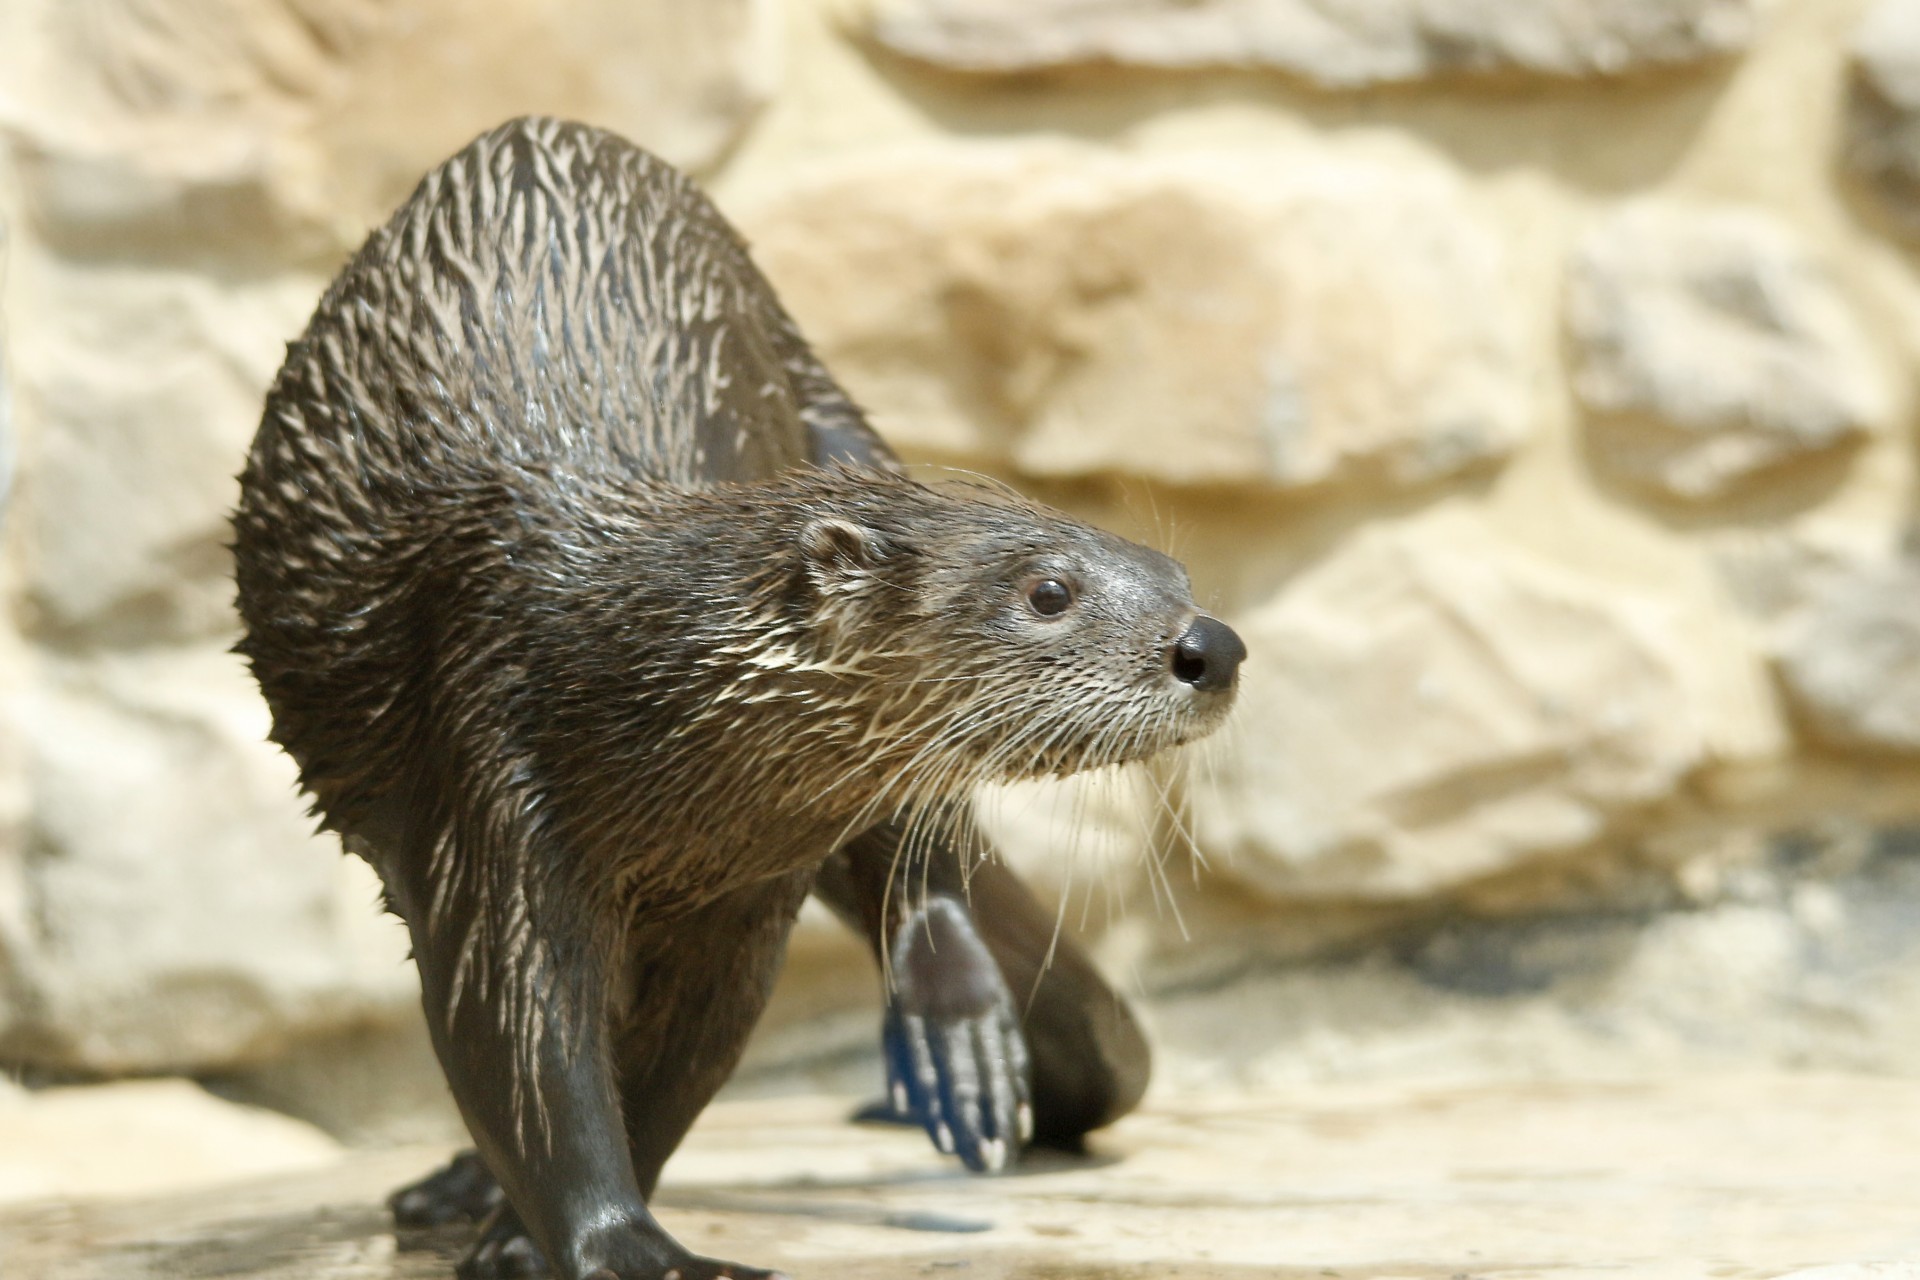 Waterotter